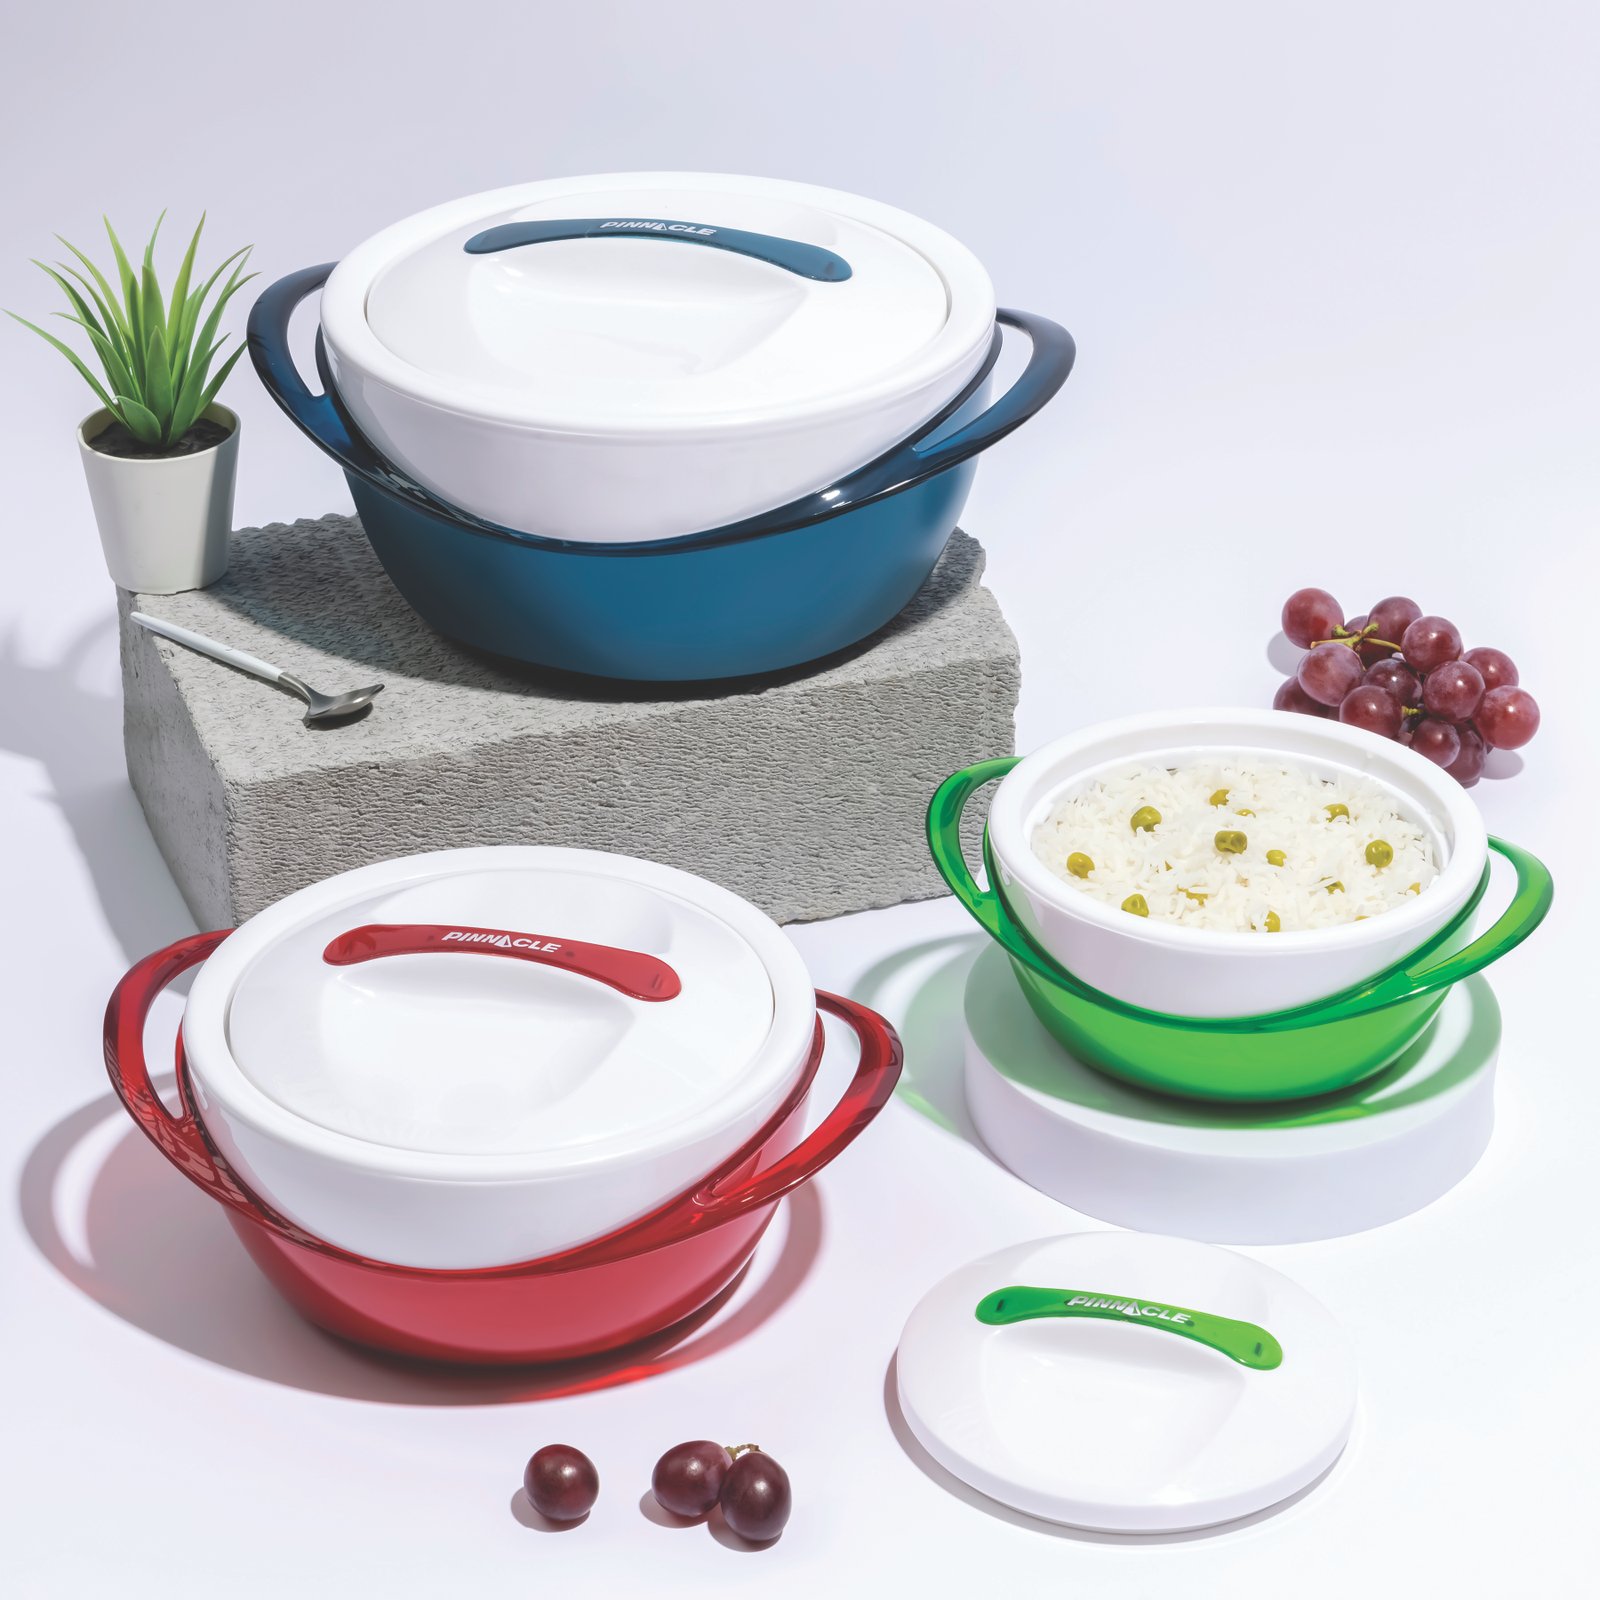 https://www.pinnaclethermo.com/assets/images/products/tableware/square_range_image.jpg